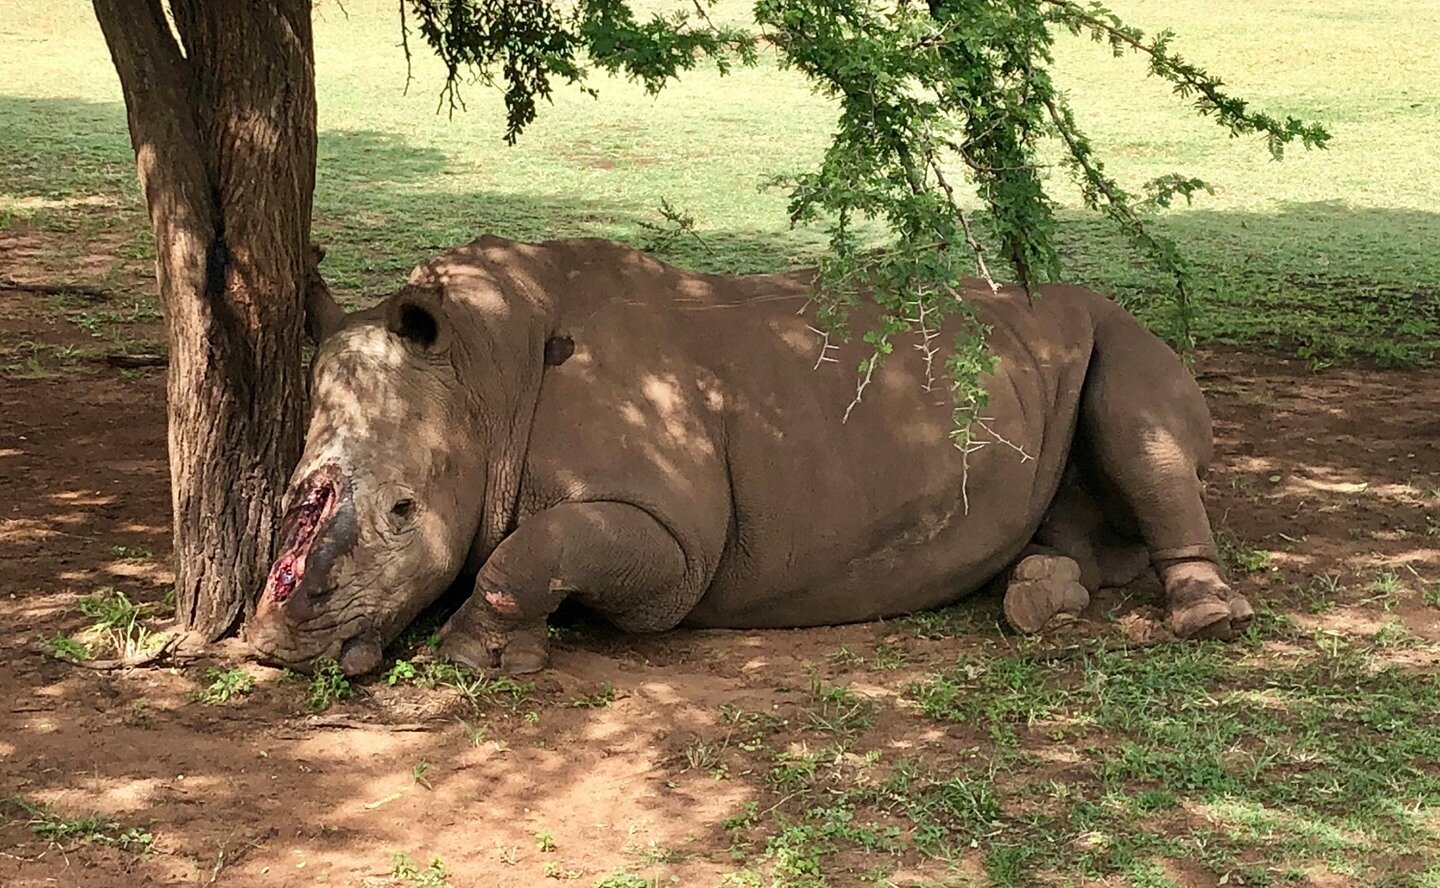 This is Seha, a rhino who was &quot;saved&quot; after poachers attacked him, butchered off his horn and left him for dead. Thanks to @savingthesurvivors, Seha's prospects are good, although not assured. 

Over and Above Africa funds projects like hel